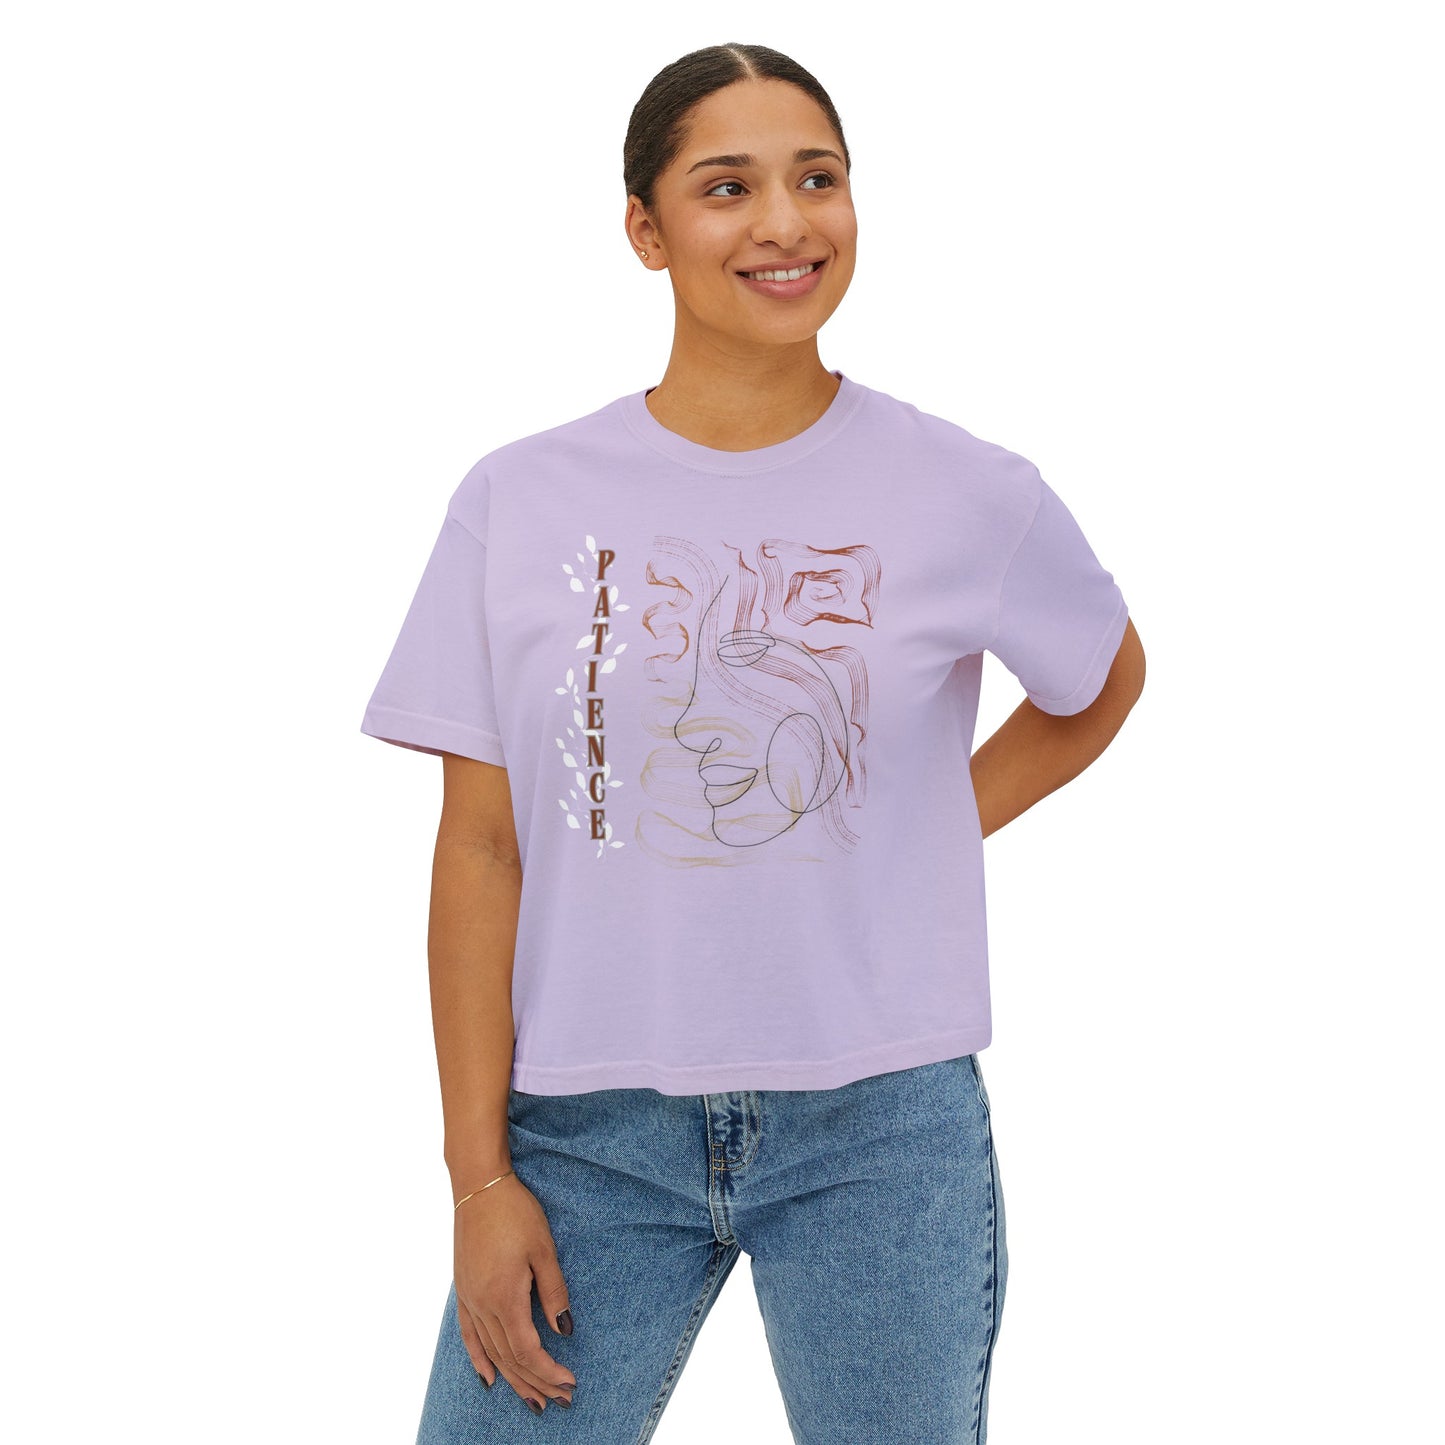 Women's Boxy Tee with Abstract Face Doodle Drawing - "PATIENCE"